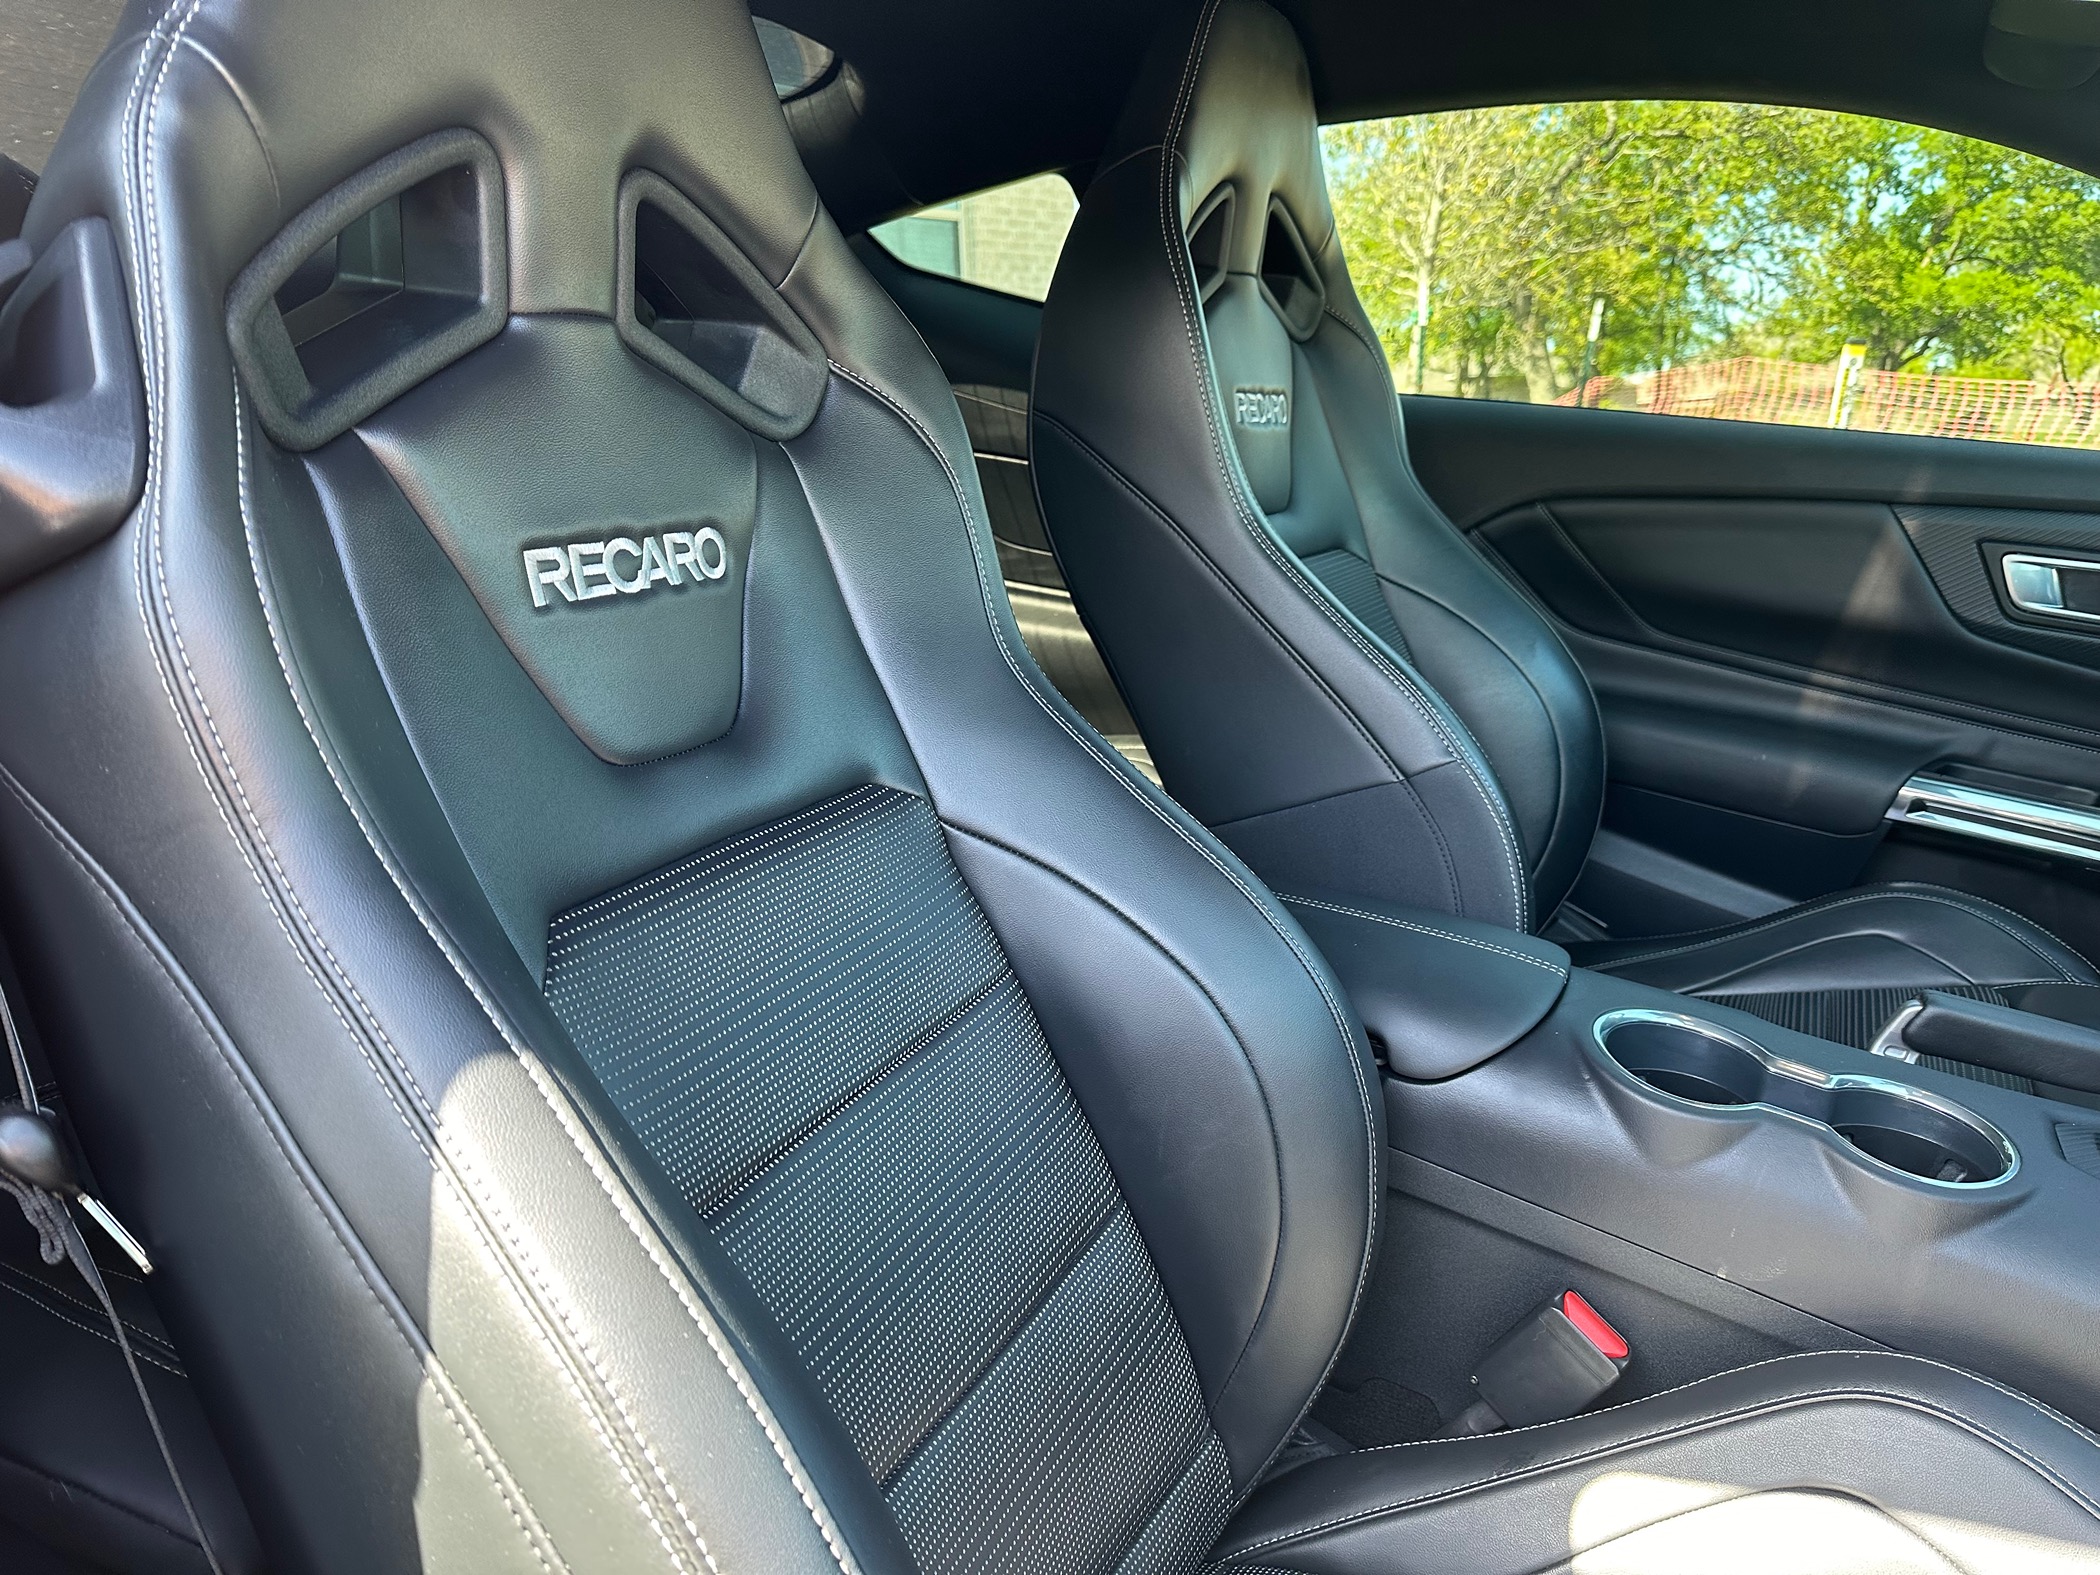 S650 Mustang Color of Recaro seats with Performance Pack AND 401A IMG_5142